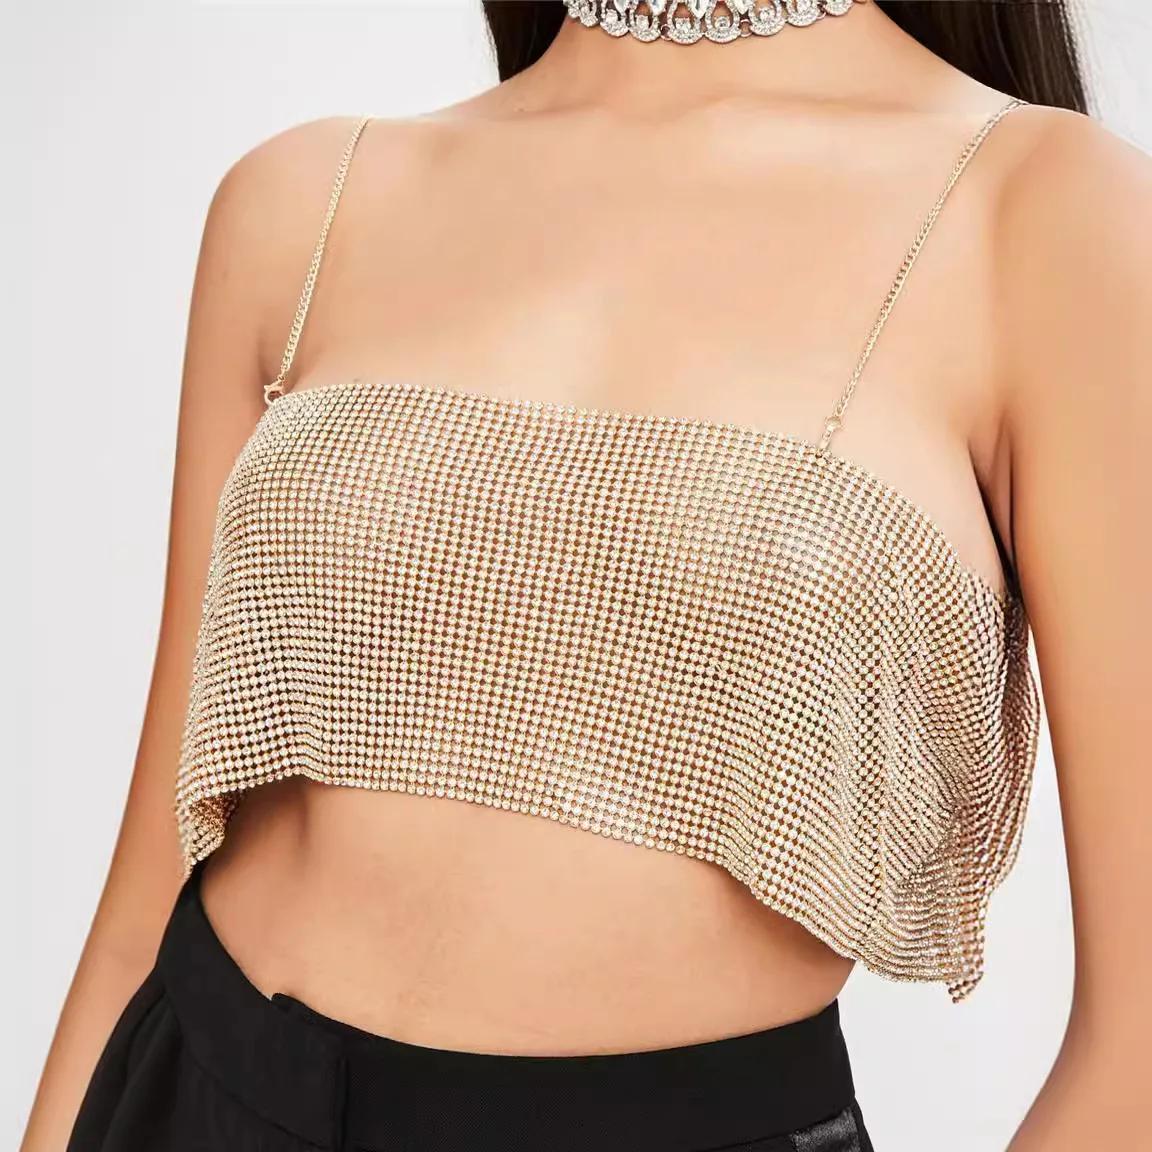 

AKYZO Handmade Summer Sexy Club Femme Fashion Metal Crop Top Backless Bralette Vest Beach Gold Sequined Party Women Tank Camisol